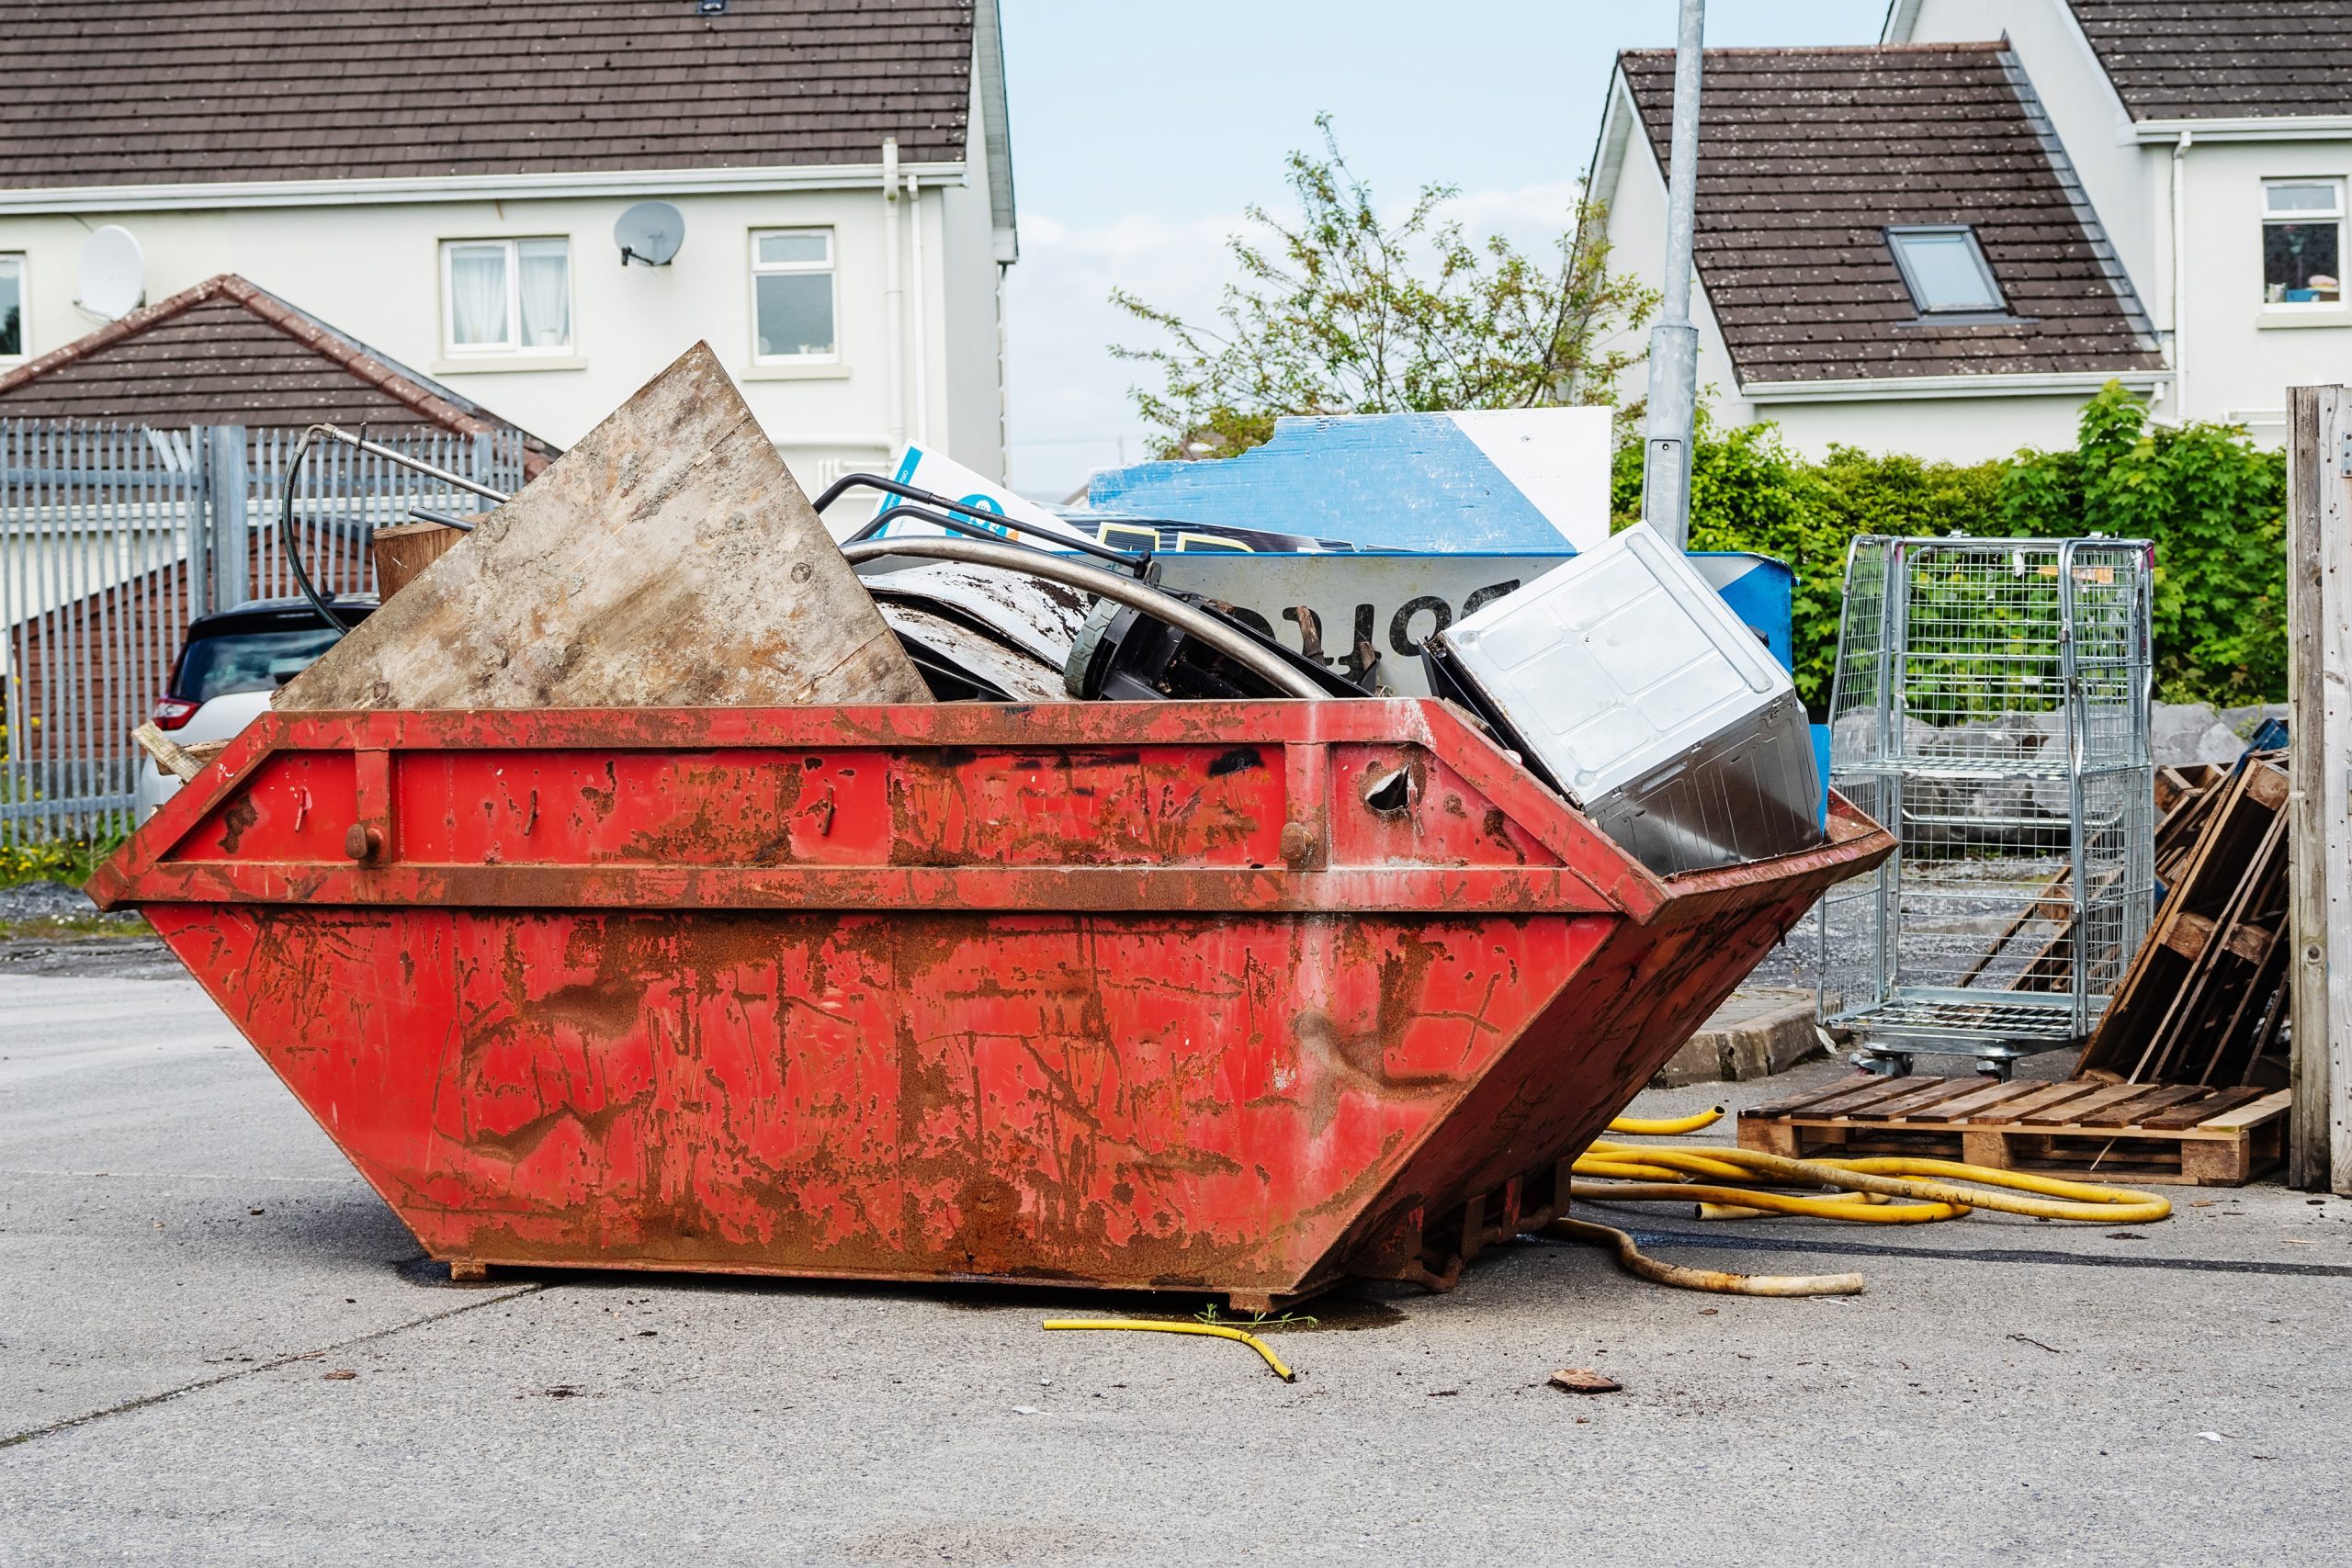 Can I schedule recurring yard waste removal services with The Junk Guys?